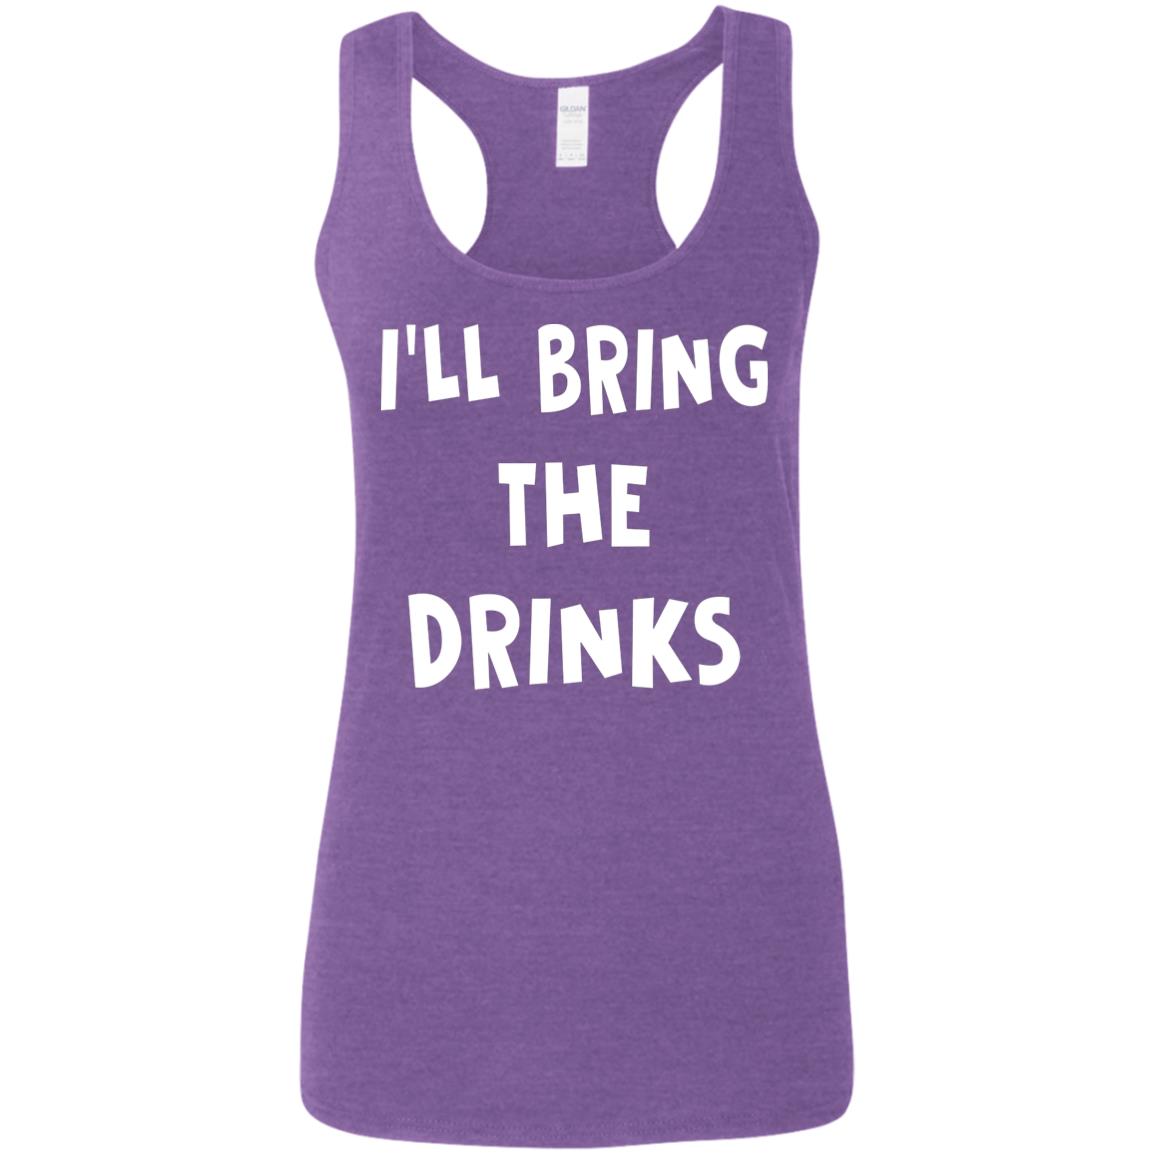 I'll Bring the Drinks Funny T-Shirt - Awesome Tee Fashion